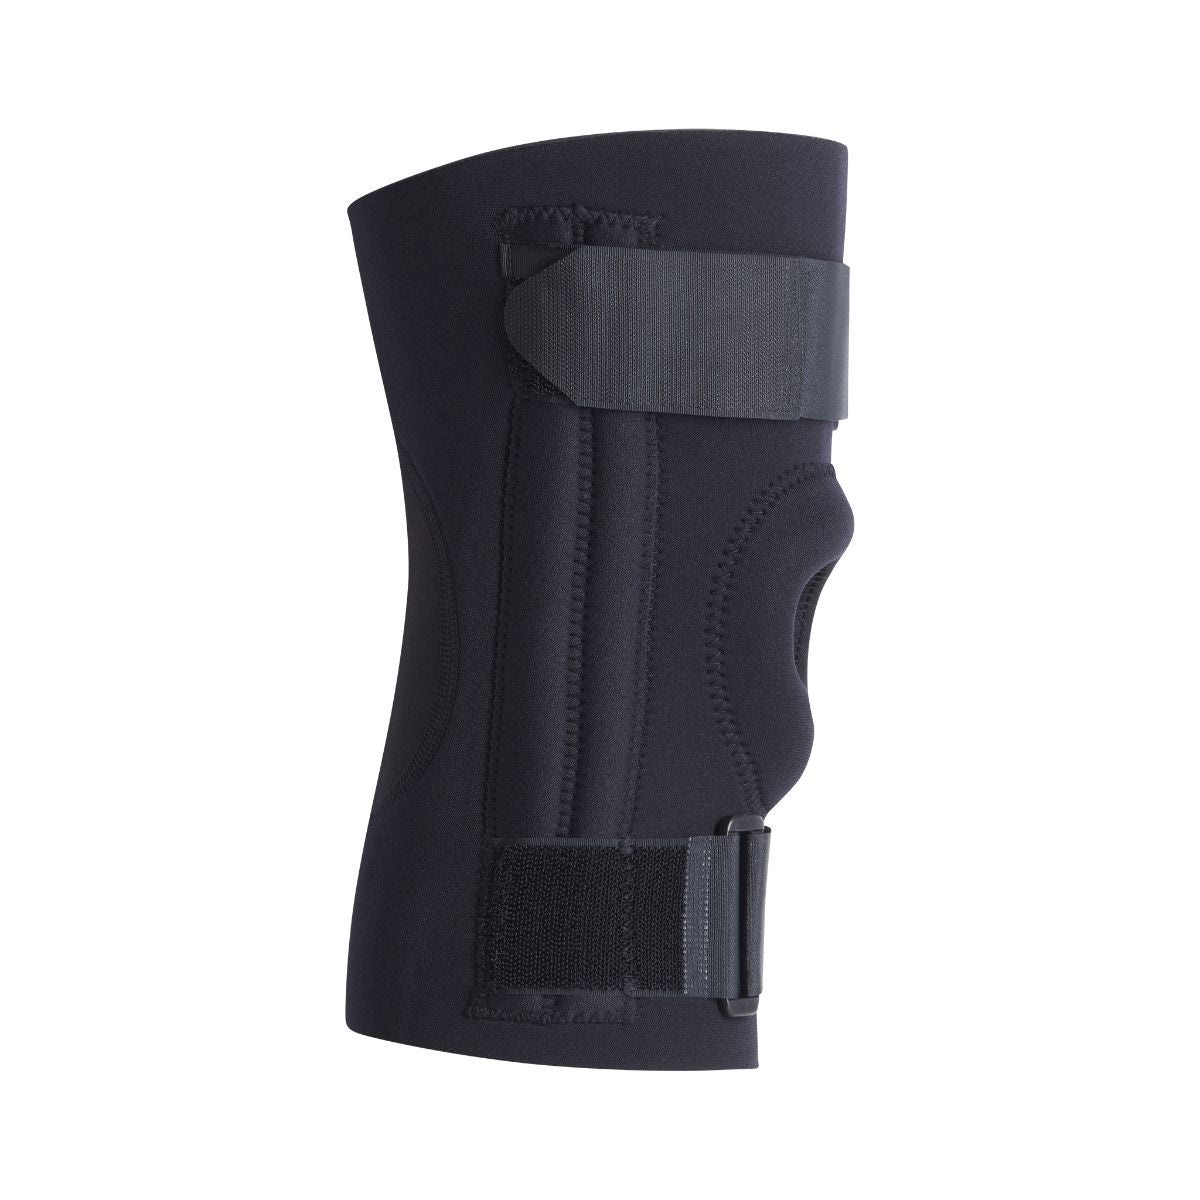 Neoprene Knee Support With Stabilized Patella